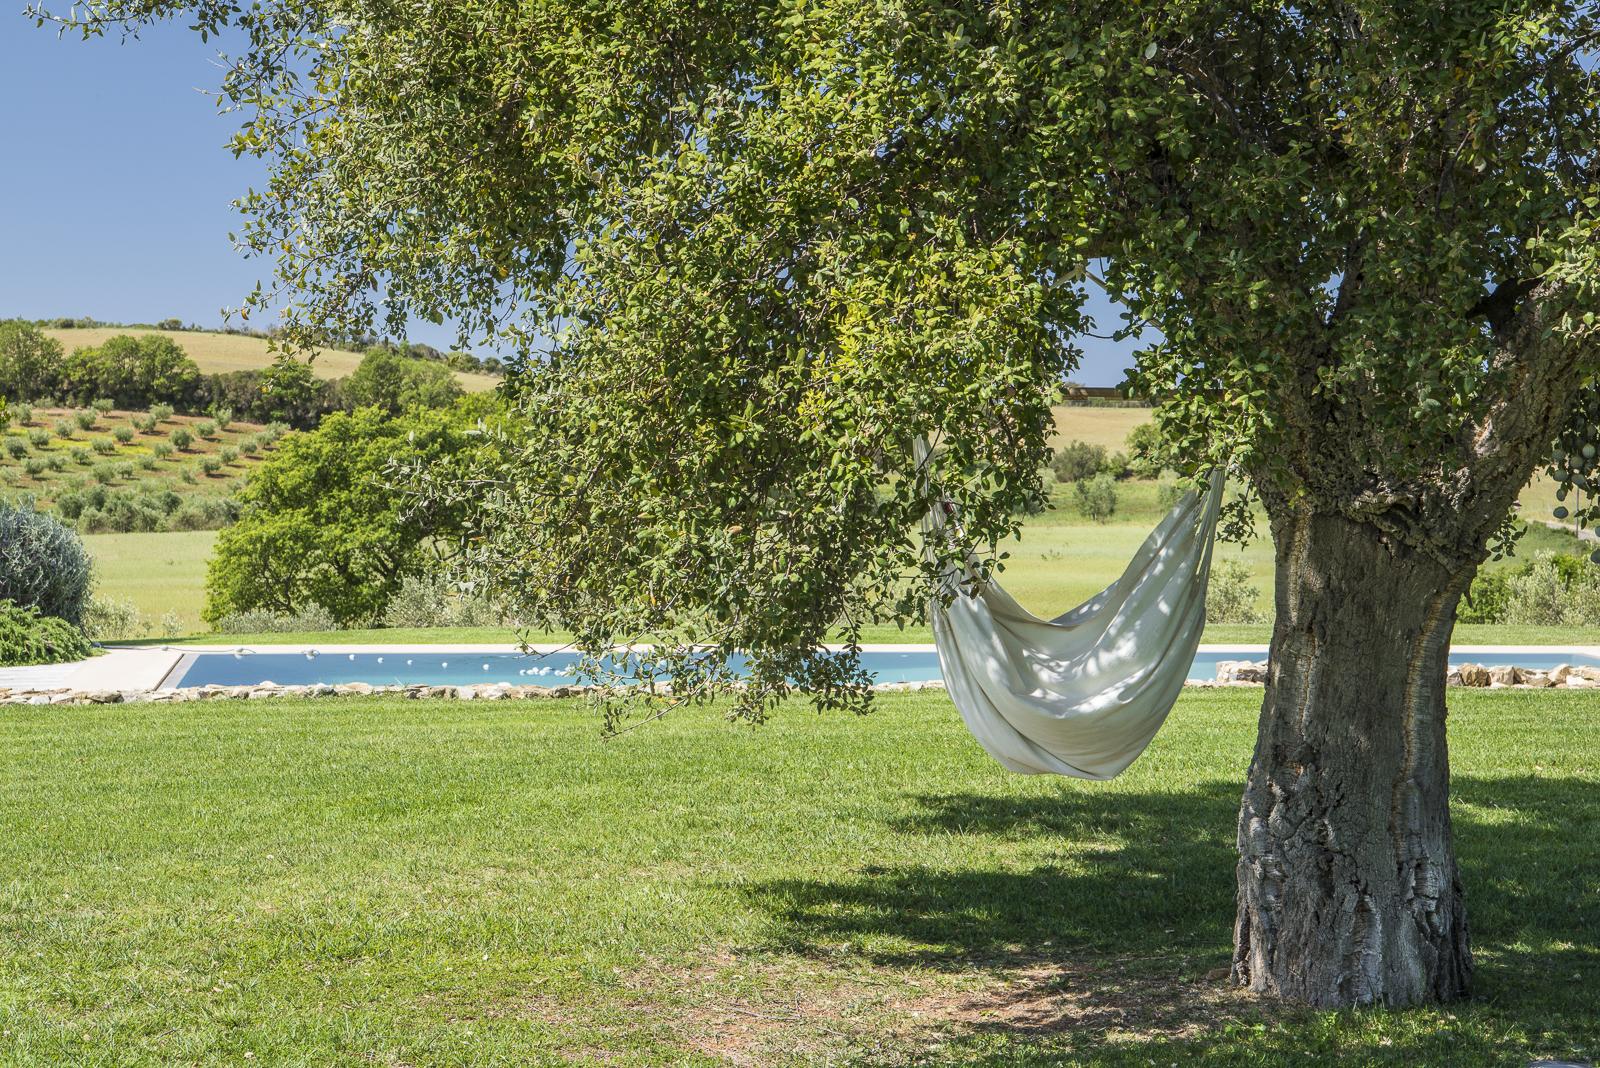 Hammock and swimming pool in the garden of Villa del Gelso, Tuscany